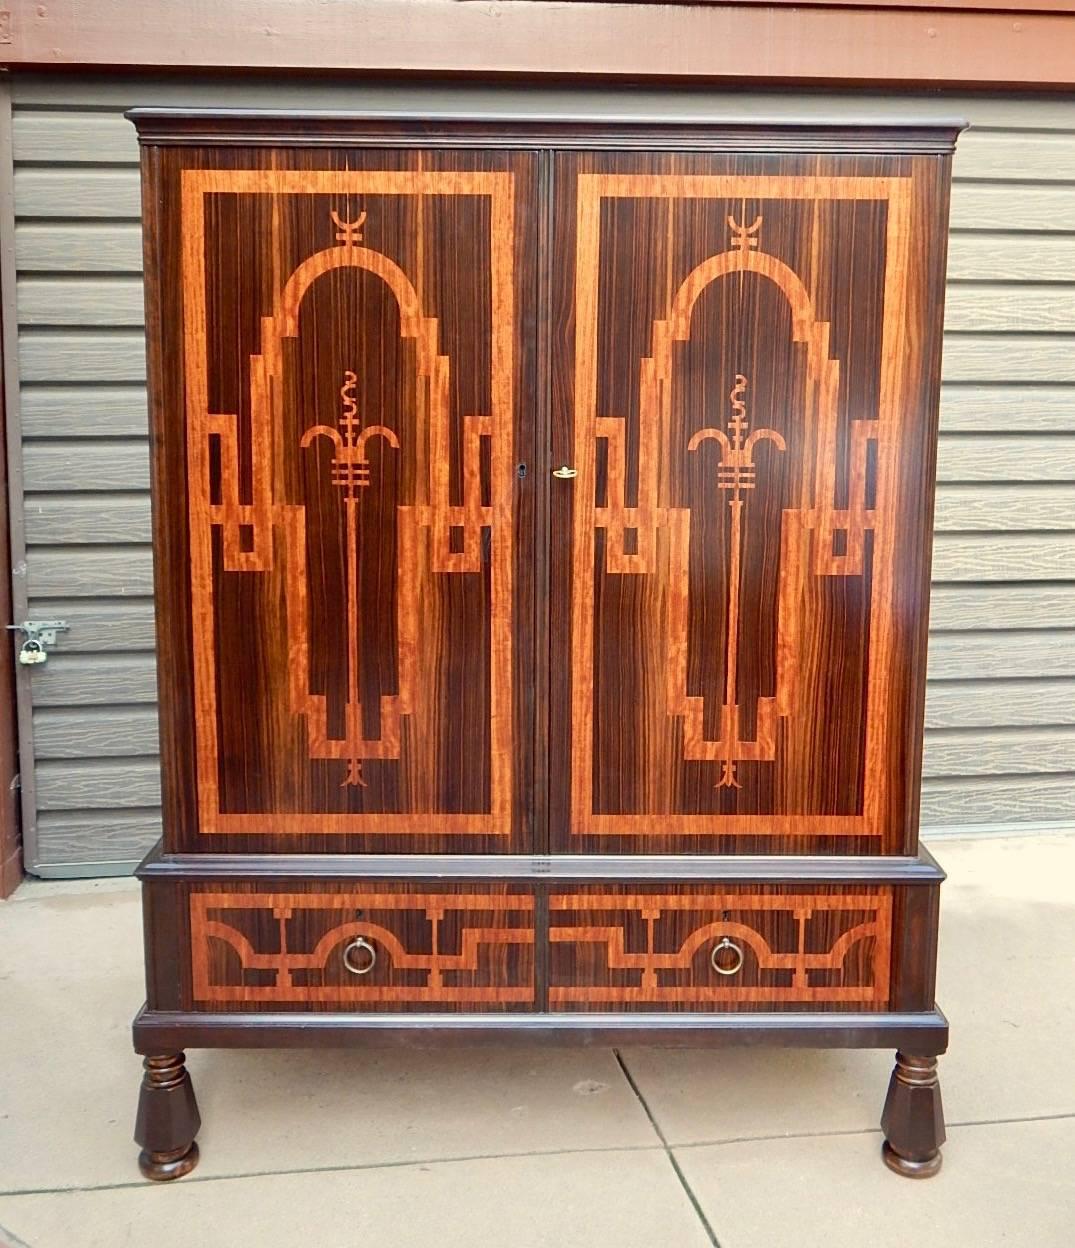 Swedish Art Deco Inlaid Storage Cabinet in Zebra and Rosewoods In Excellent Condition For Sale In Richmond, VA